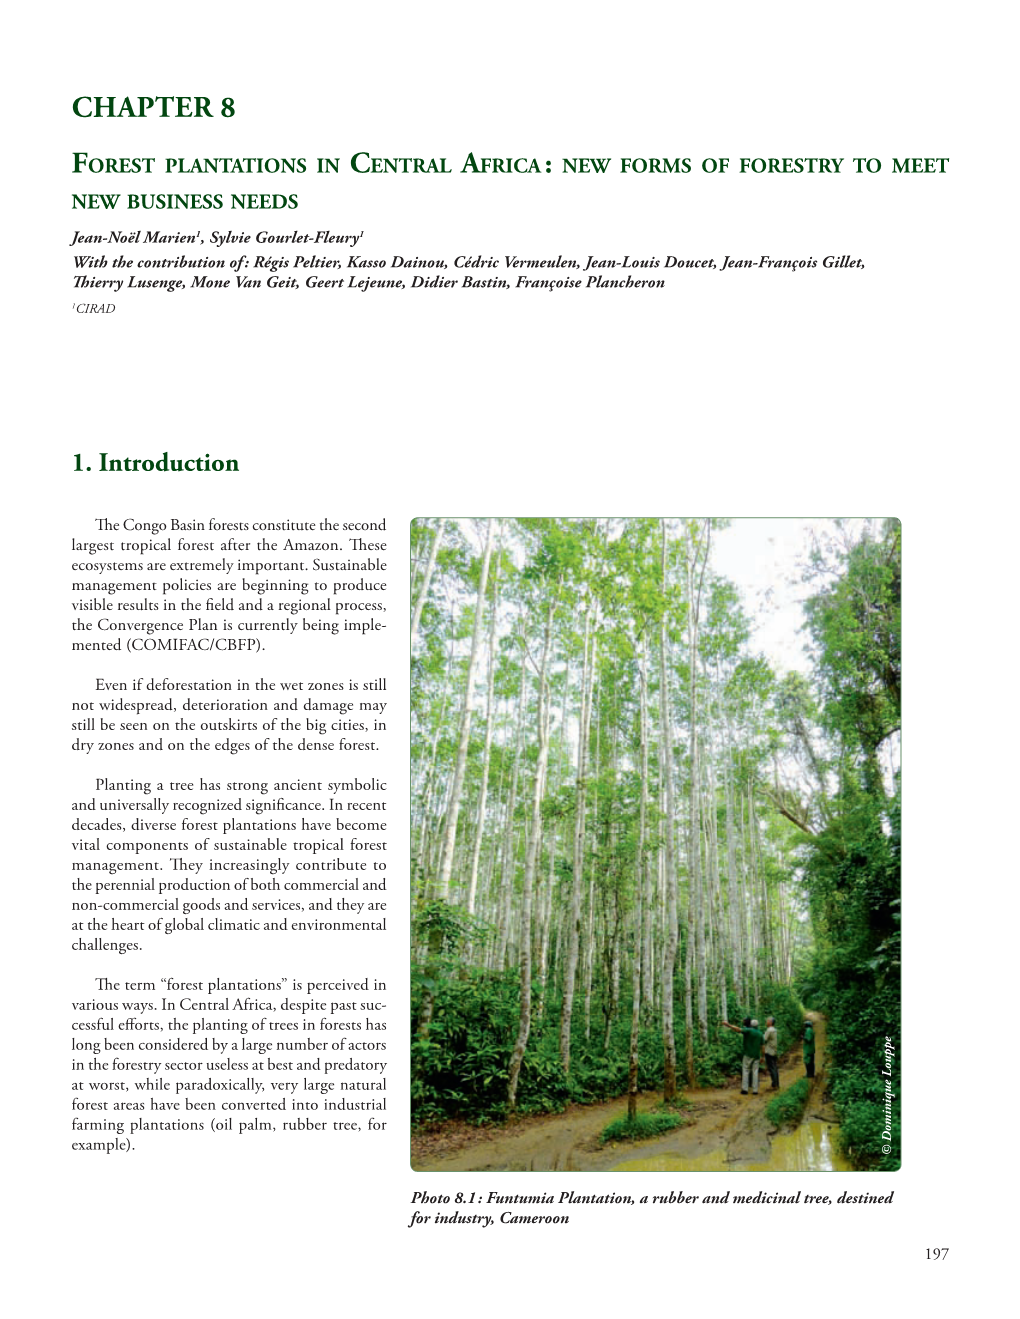 Forest Plantations in Central Africa